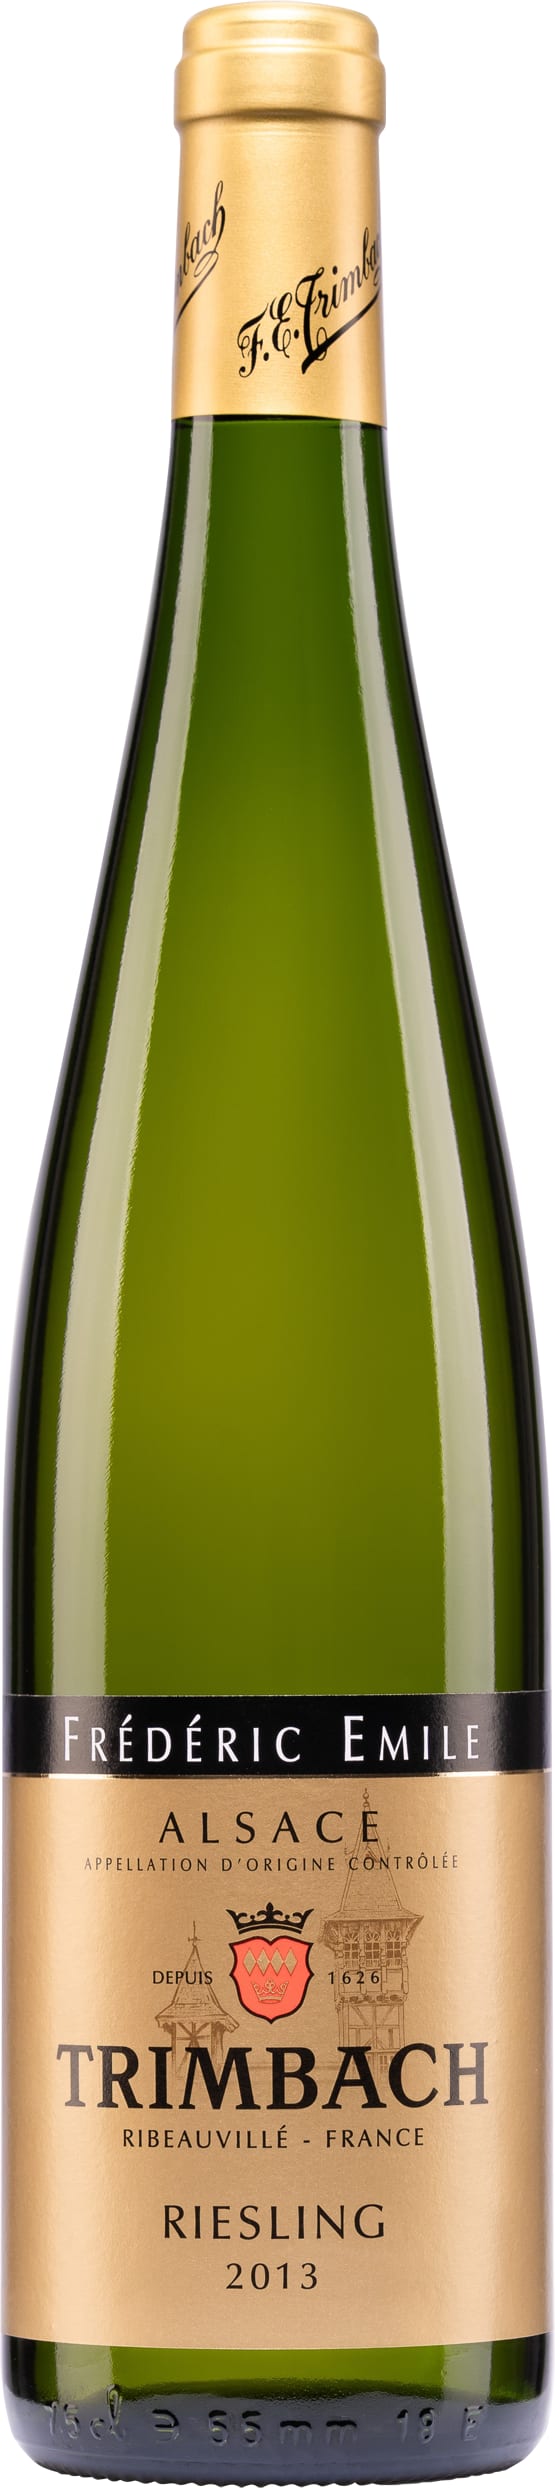 Trimbach Riesling Frederic Emile 2017 75cl - Buy Trimbach Wines from GREAT WINES DIRECT wine shop